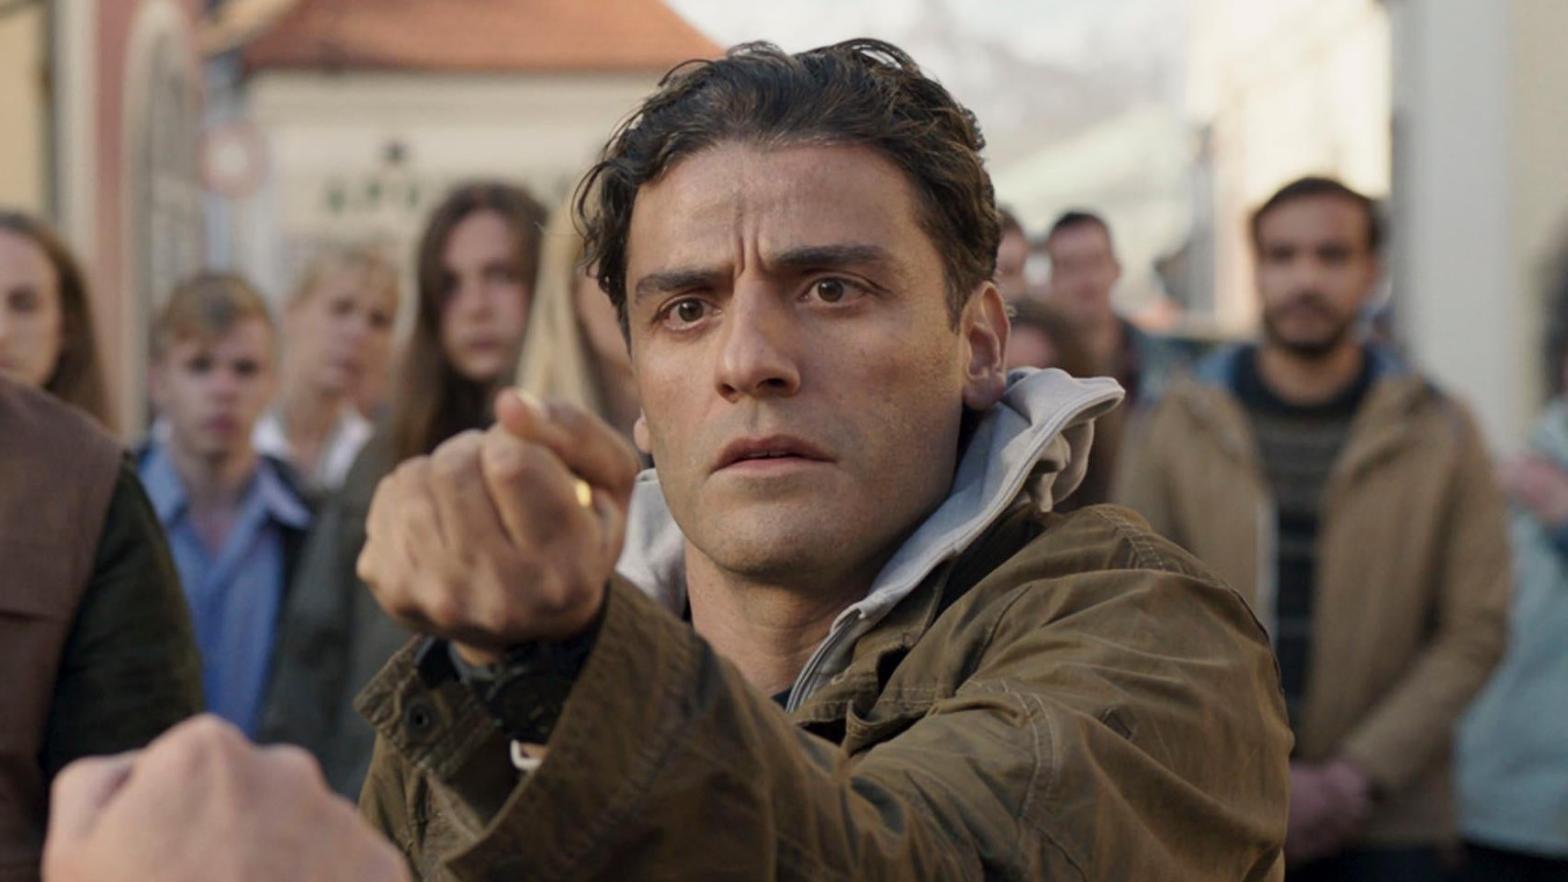 Oscar Isaac has Marvel in the palm of his hand. (Image: Marvel Studios)